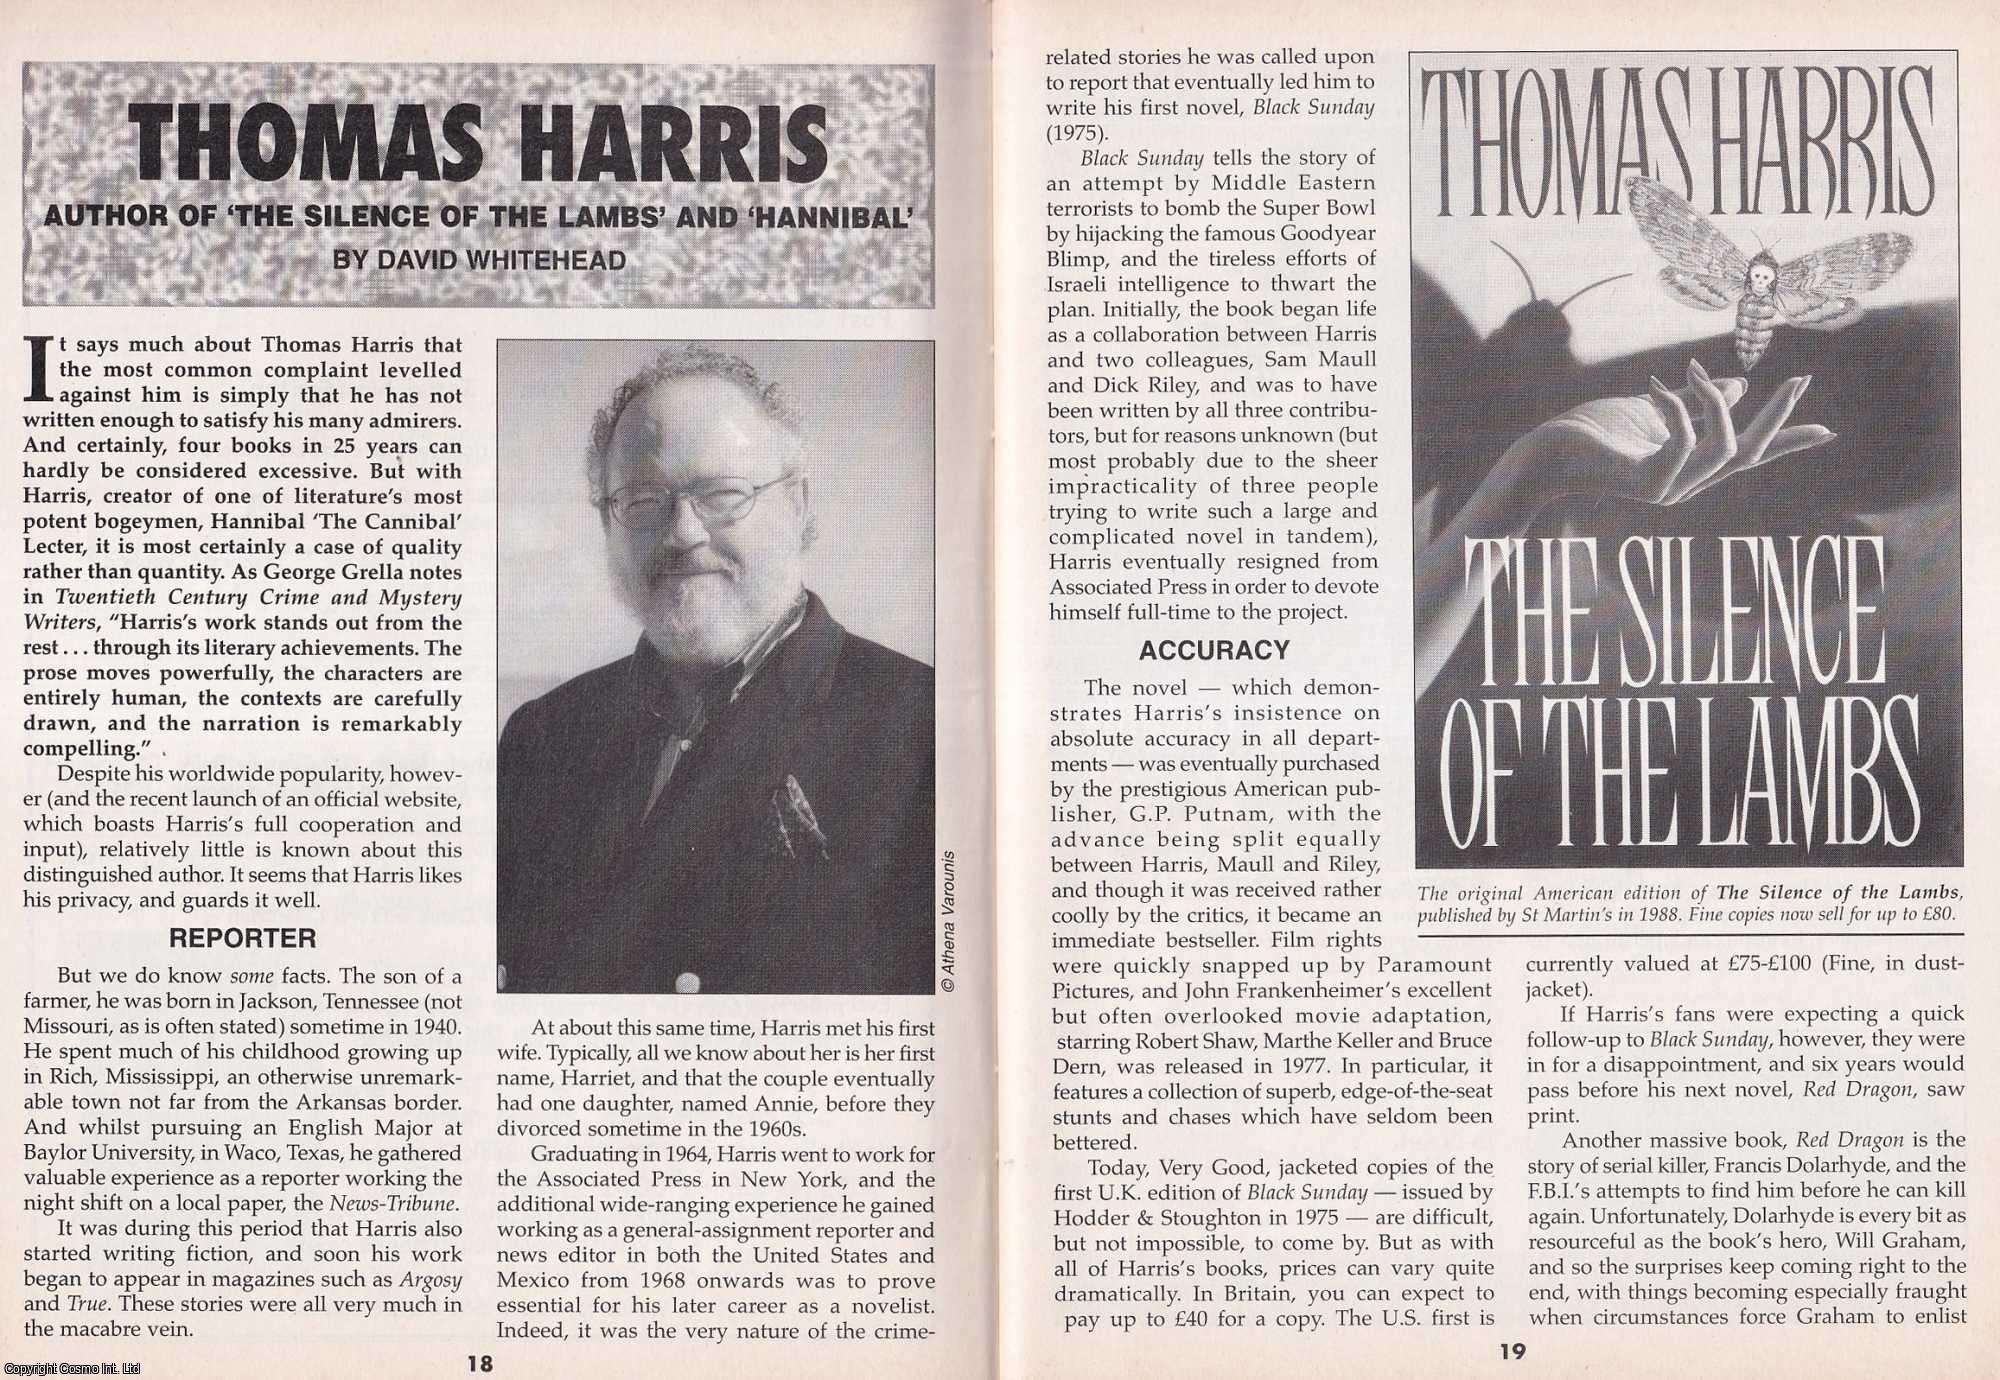 David Whitehead - Thomas Harris. Author of The Silence of The Lambs. This is an original article separated from an issue of The Book & Magazine Collector publication.